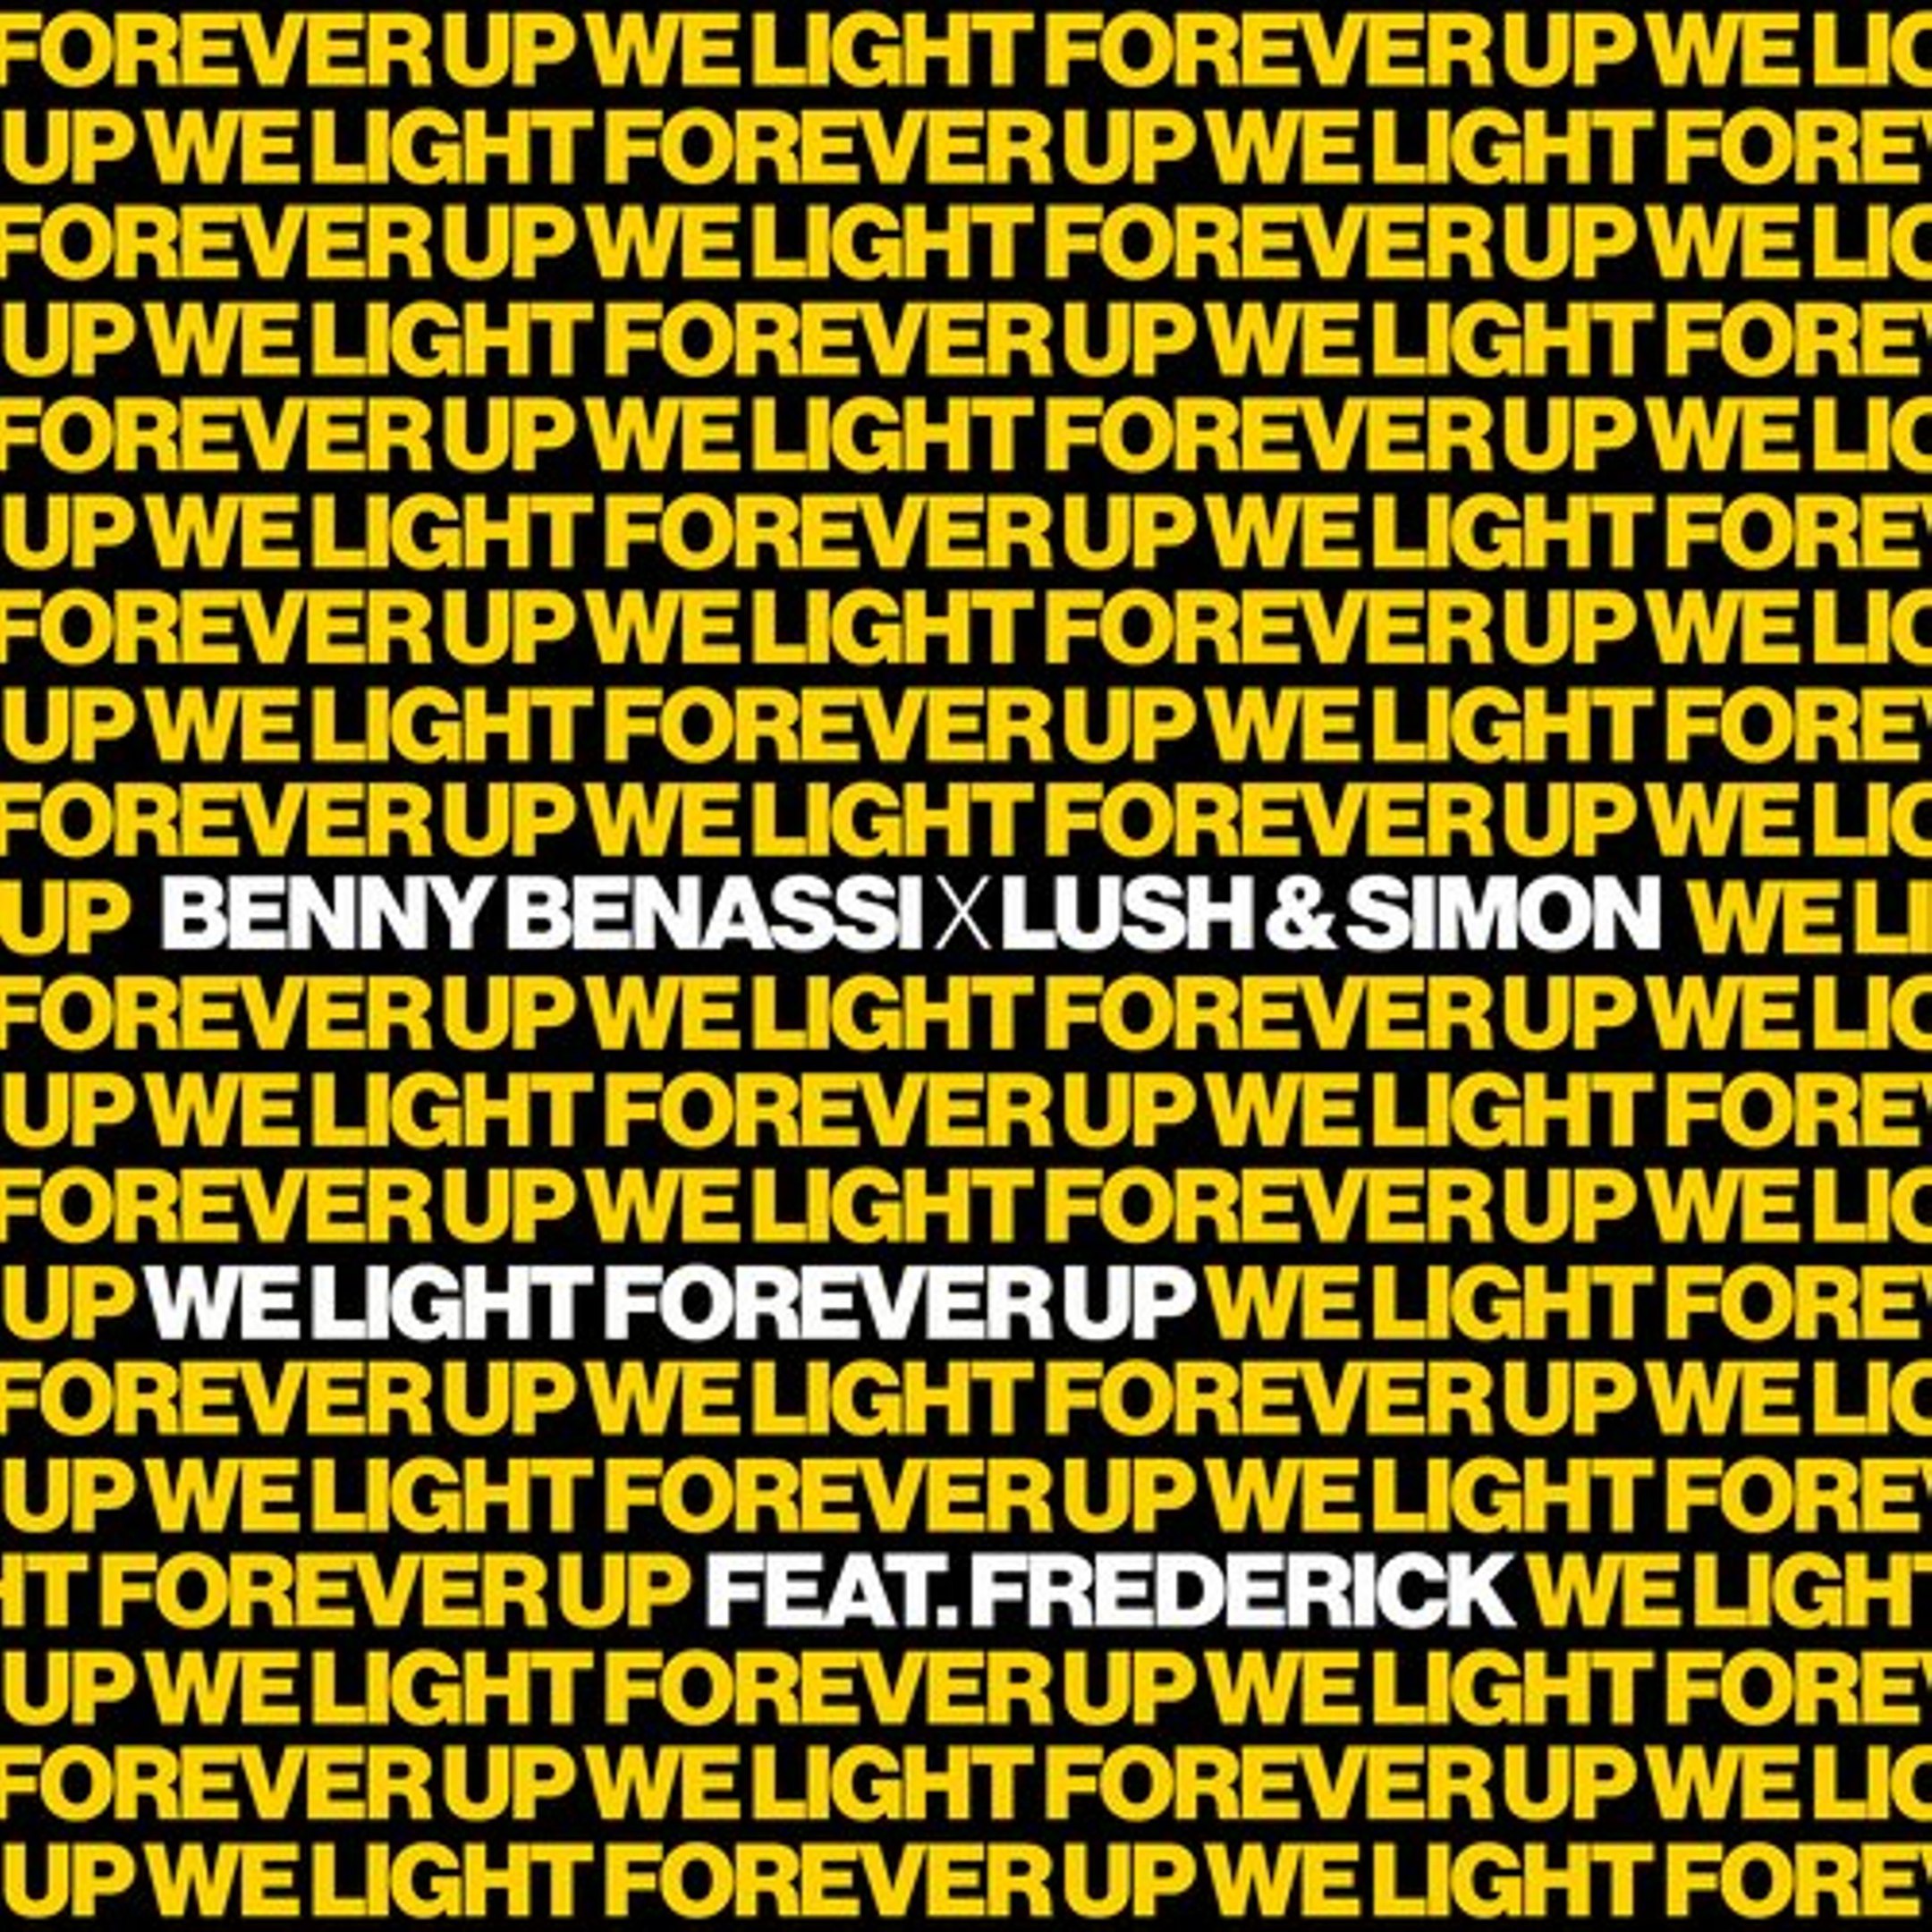 Benny Benassi x Lush & Simon feat. Frederick - We Light Forever Up (Extended Mix)